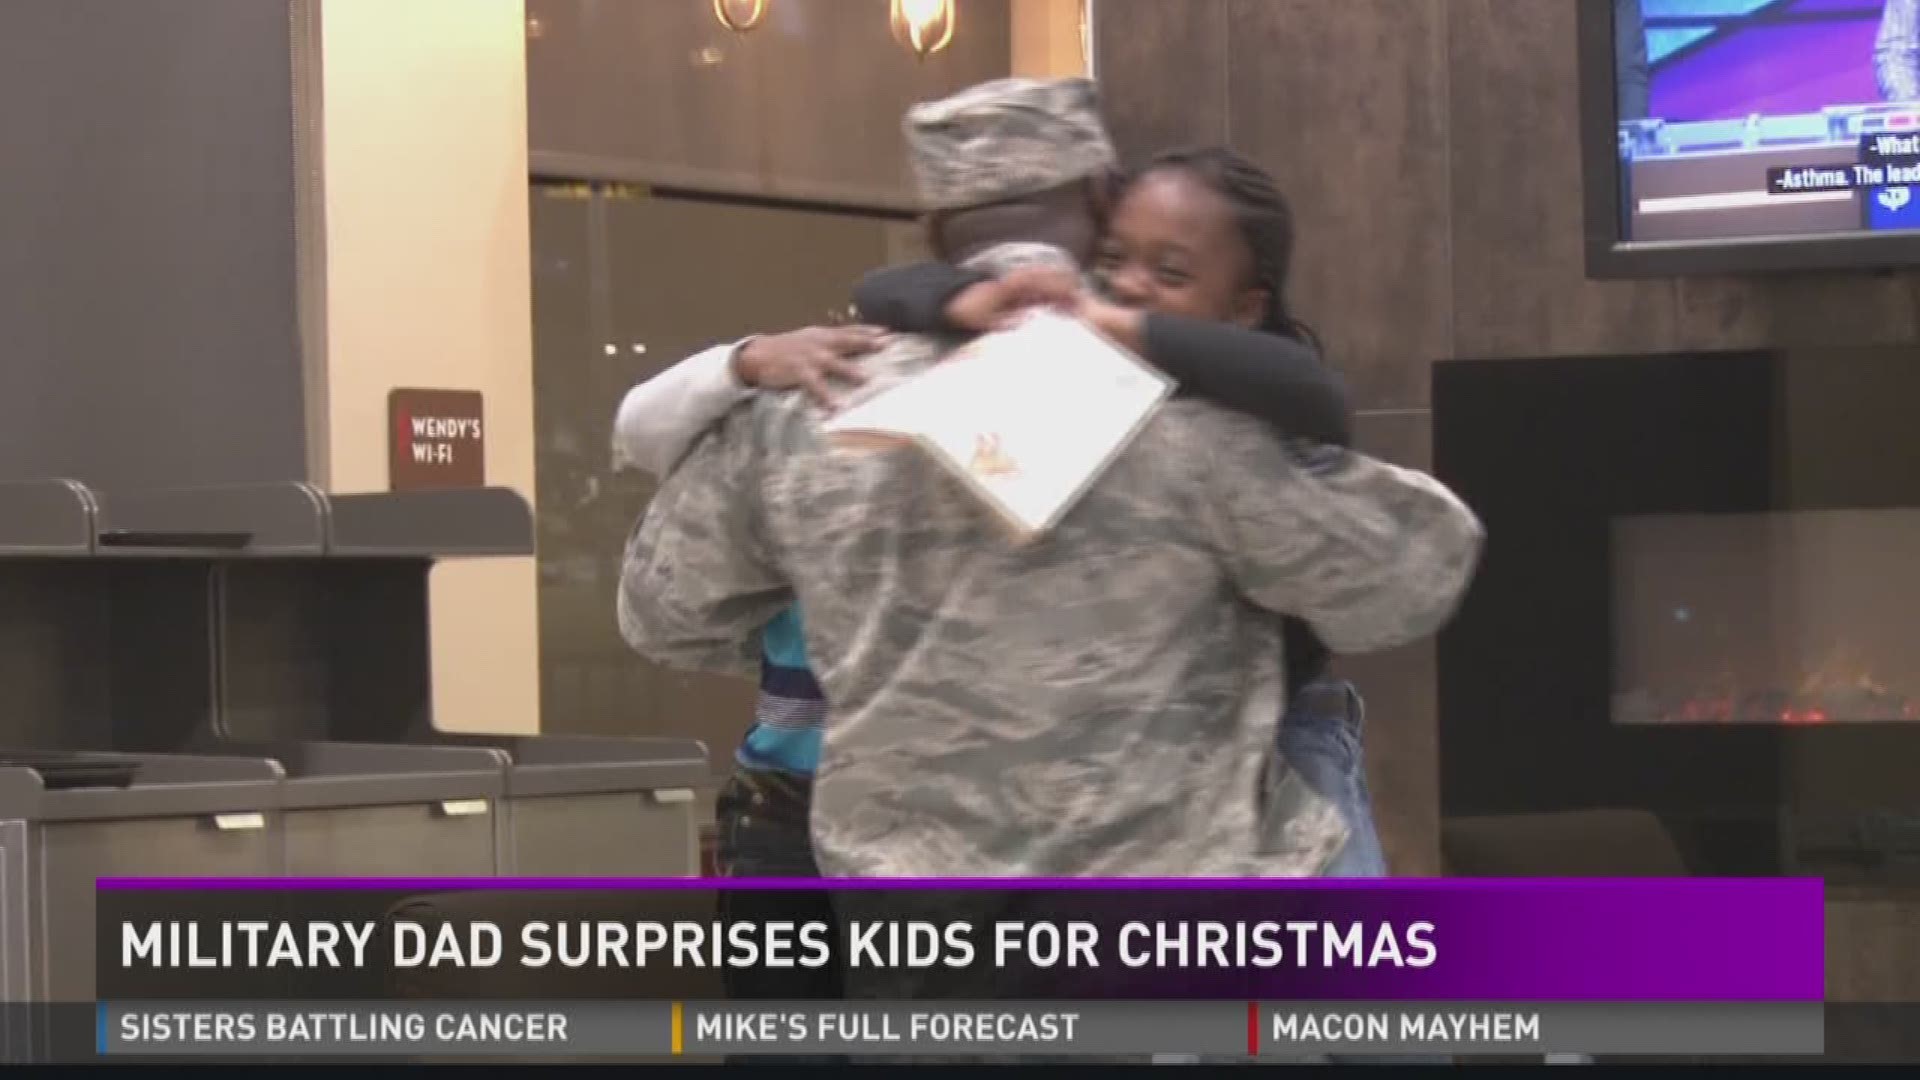 Military dad surprises kids for Christmas